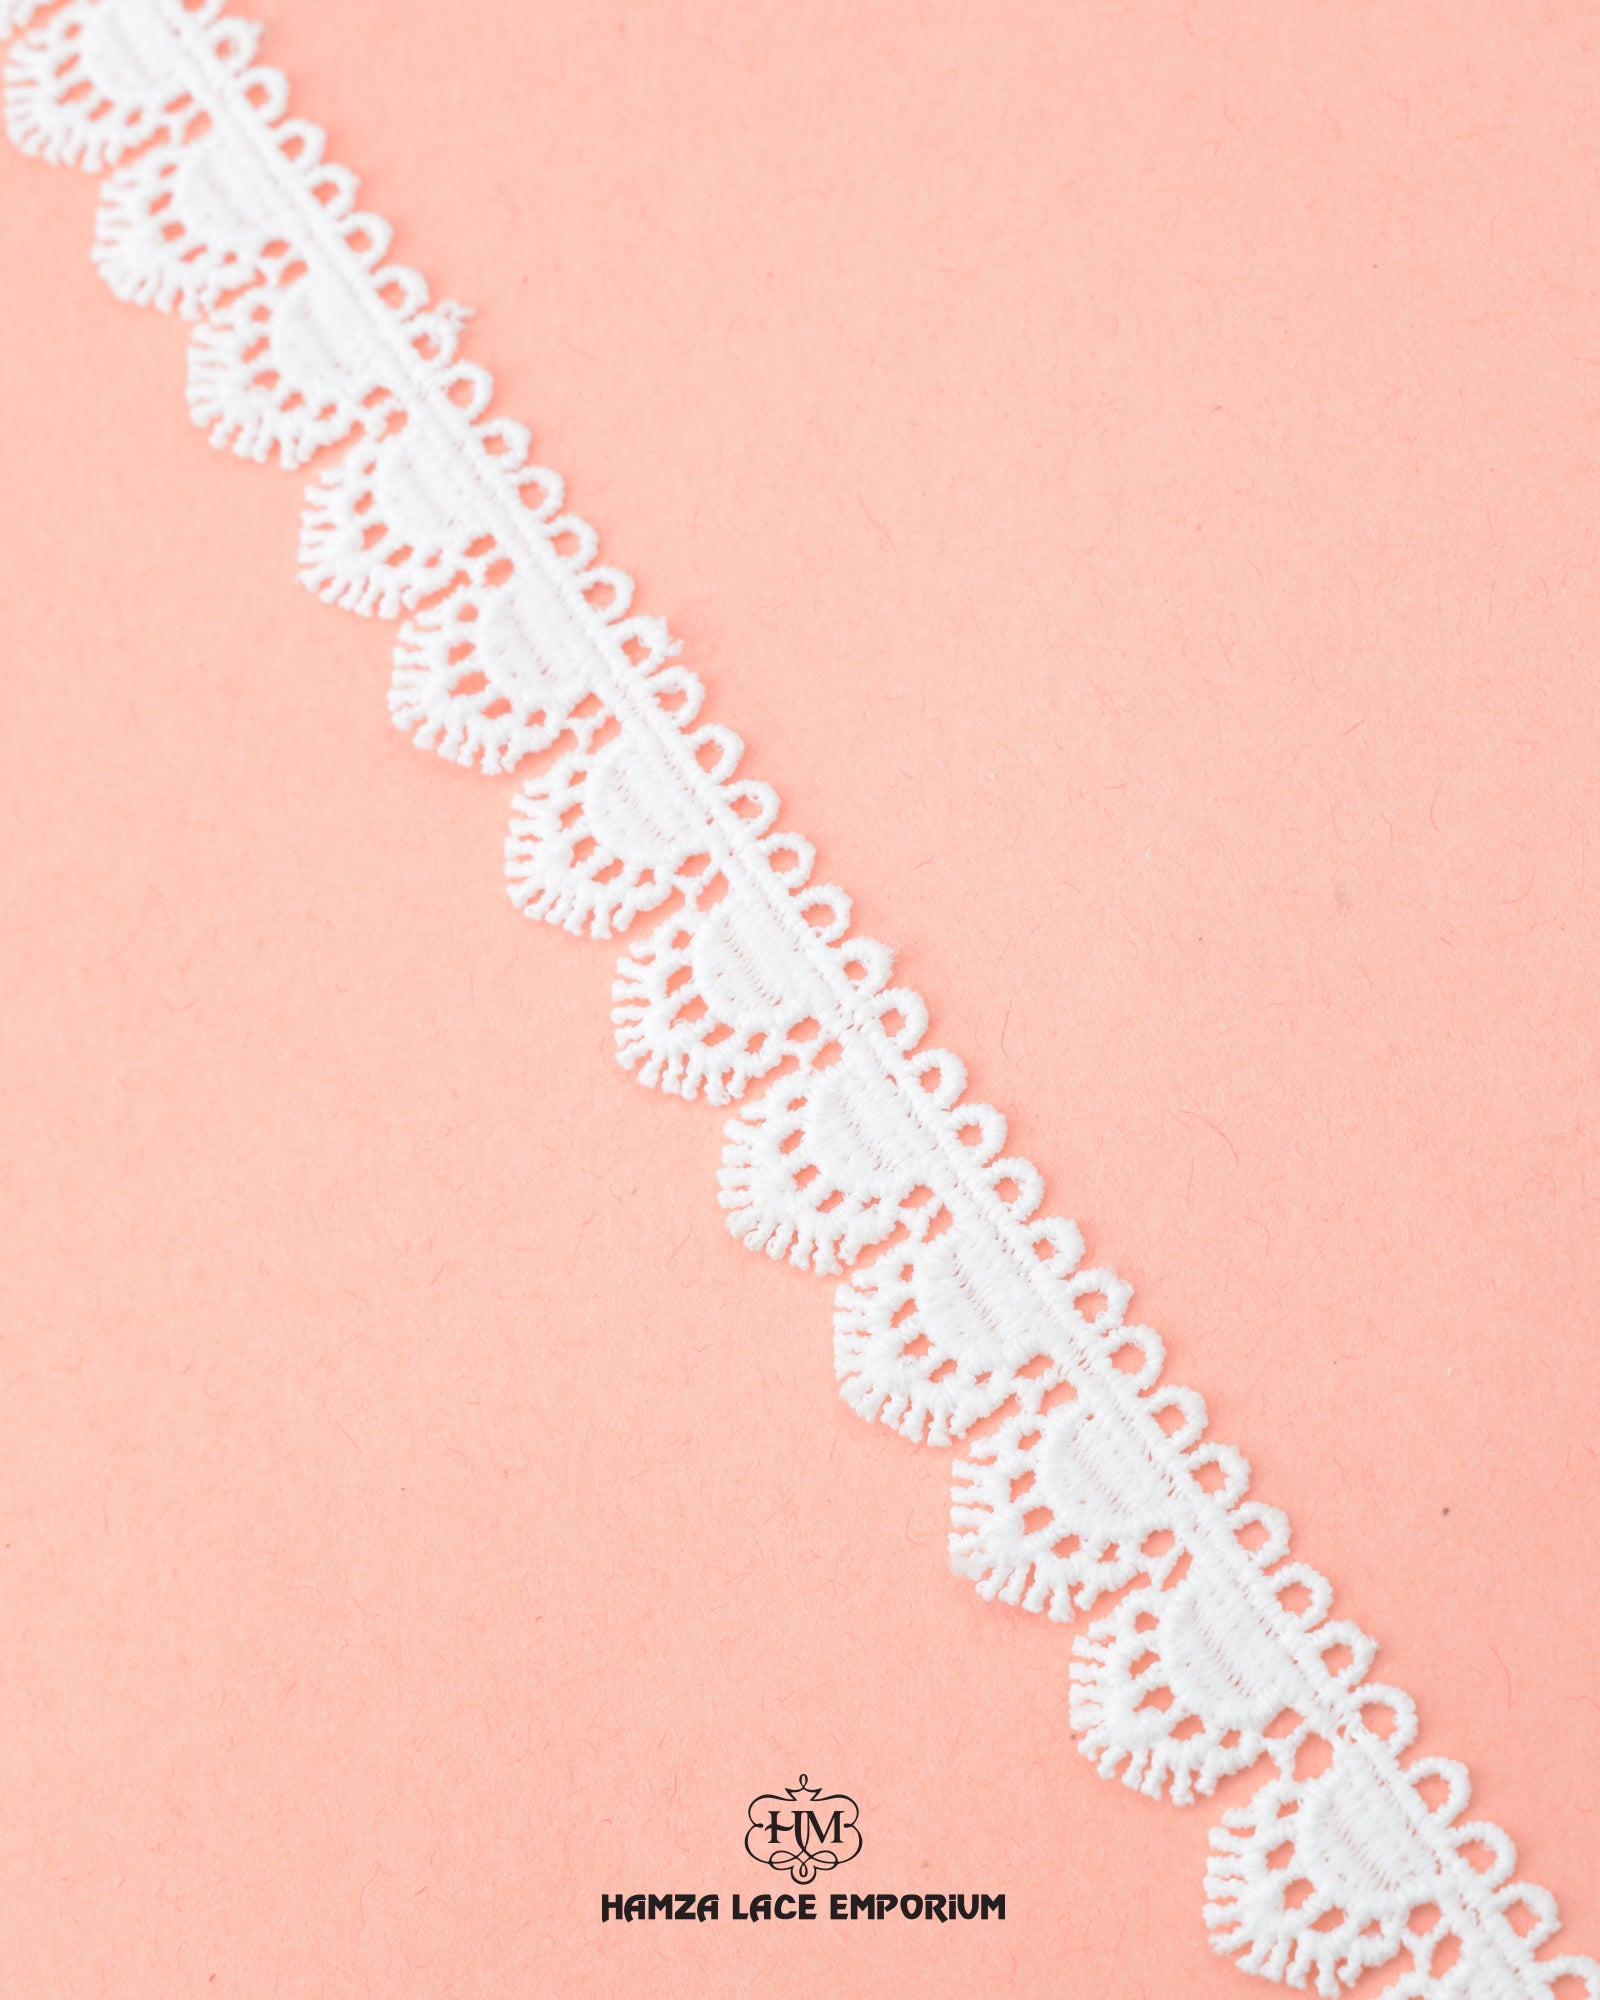 'Edging Lace 6993' is on the pink background with 'Hamza Lace' sign at the bottom